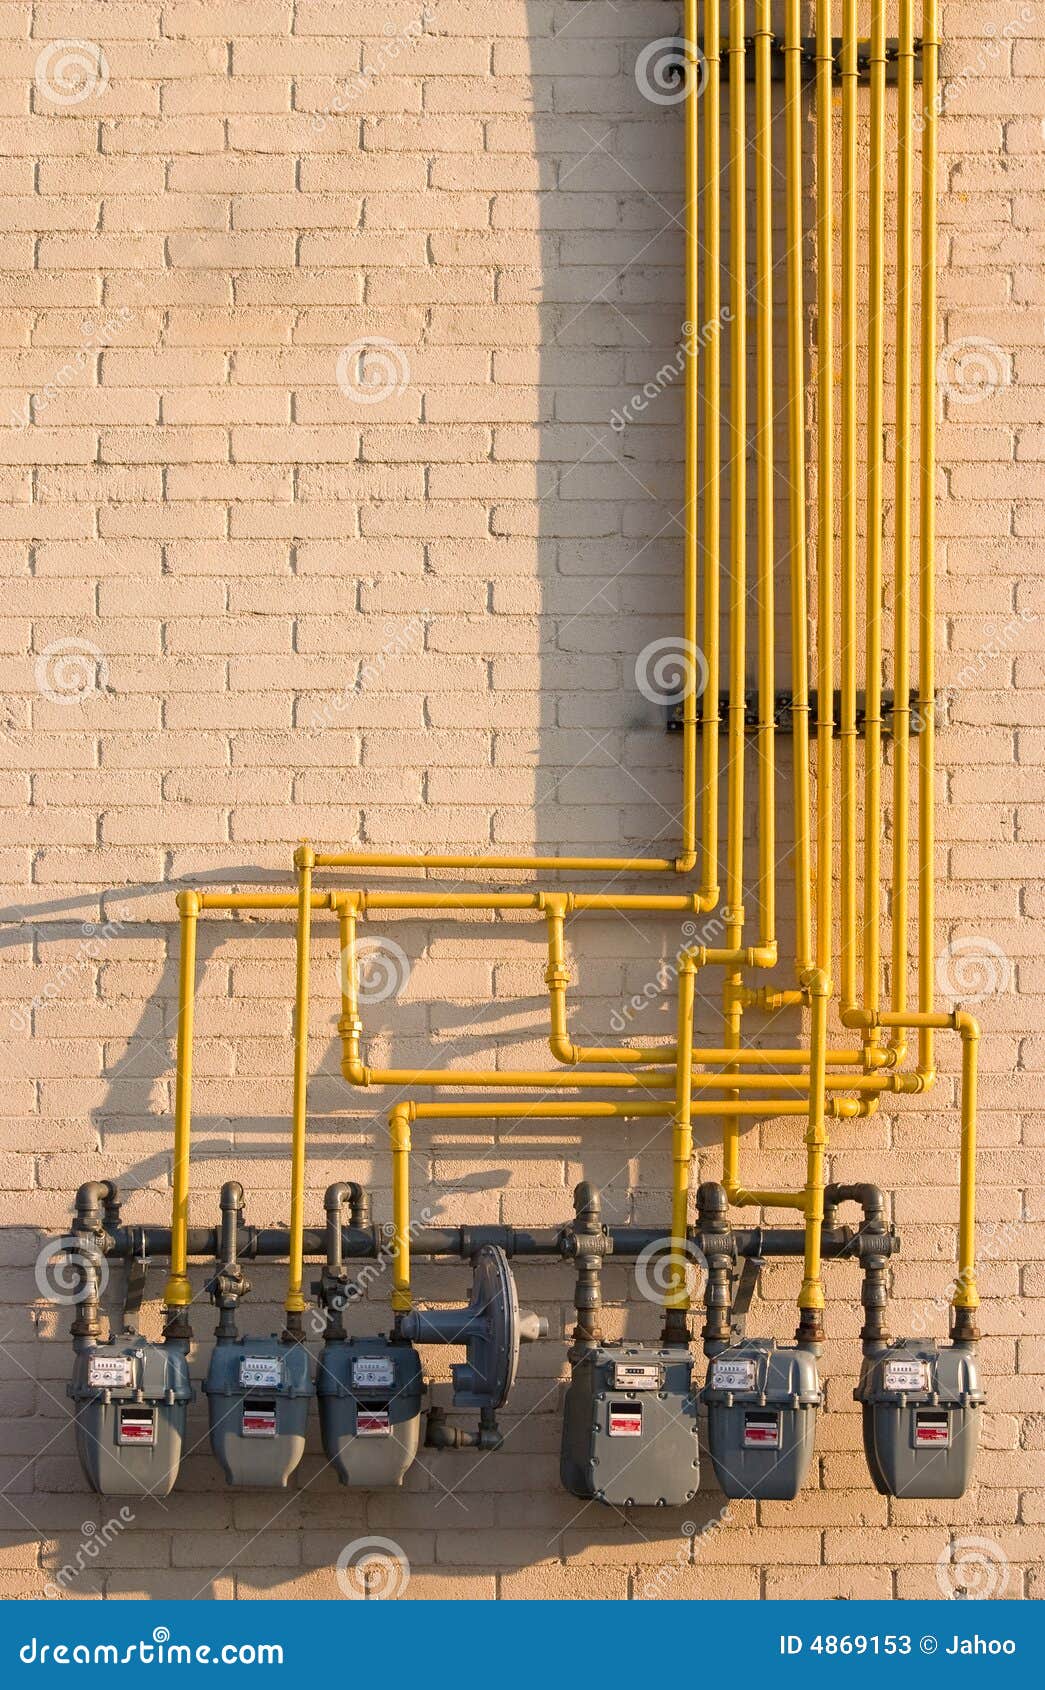 natural gas meters maze